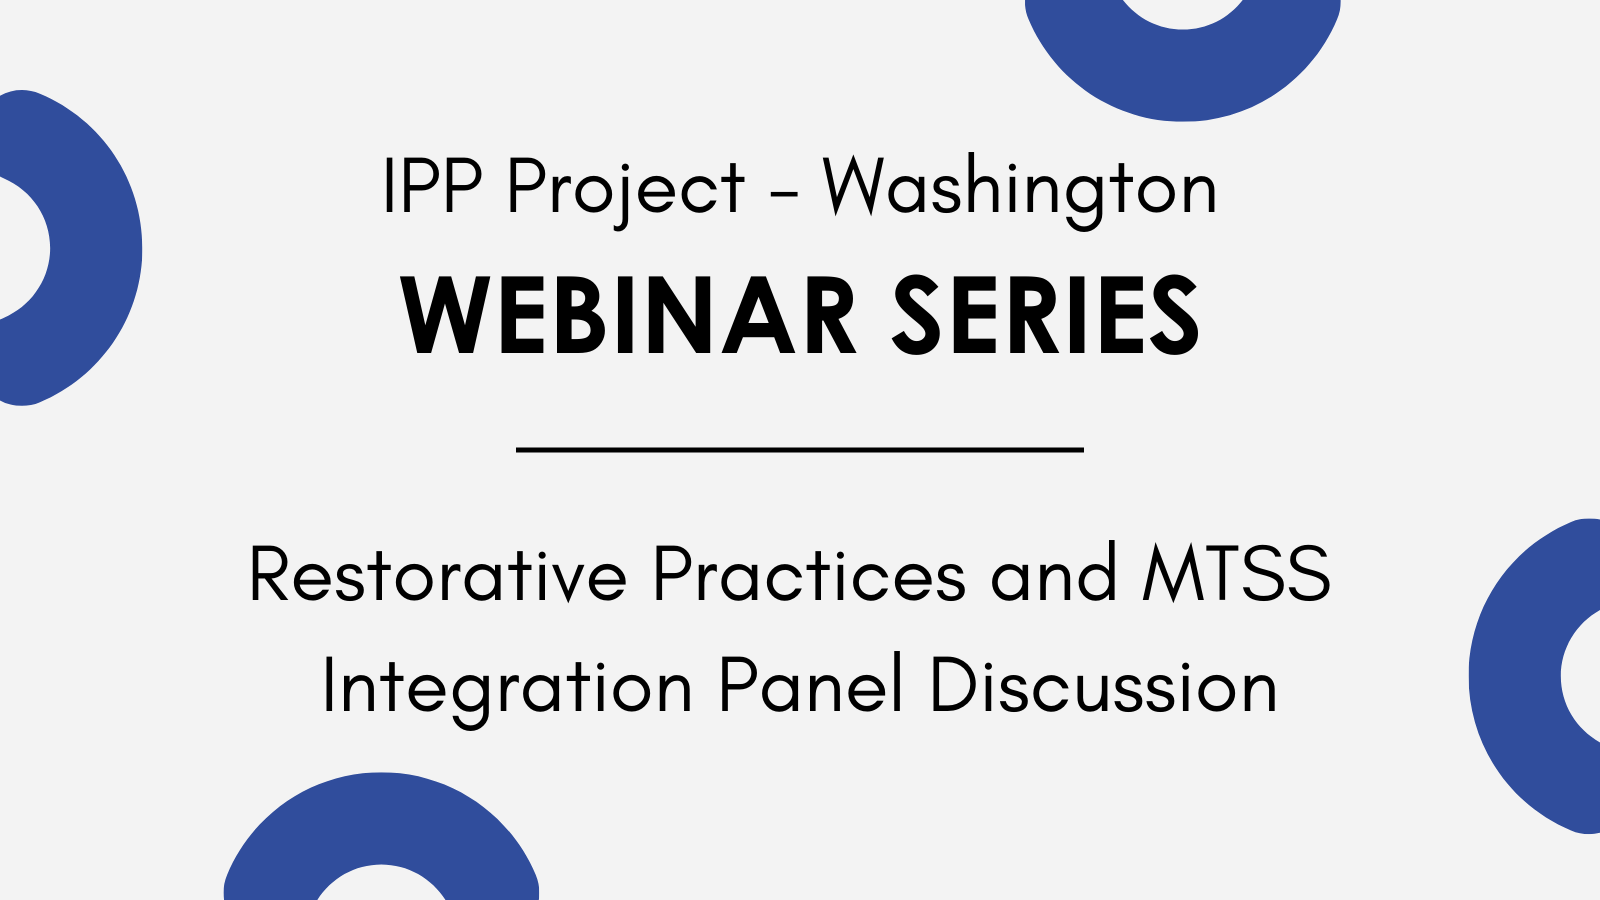 You will hear from a panel of Collaborative Learning Solutions Consultants who have provided training for schools in Washington, as well as students, educators, administrators, and parents who have been committed and engaged in the work.